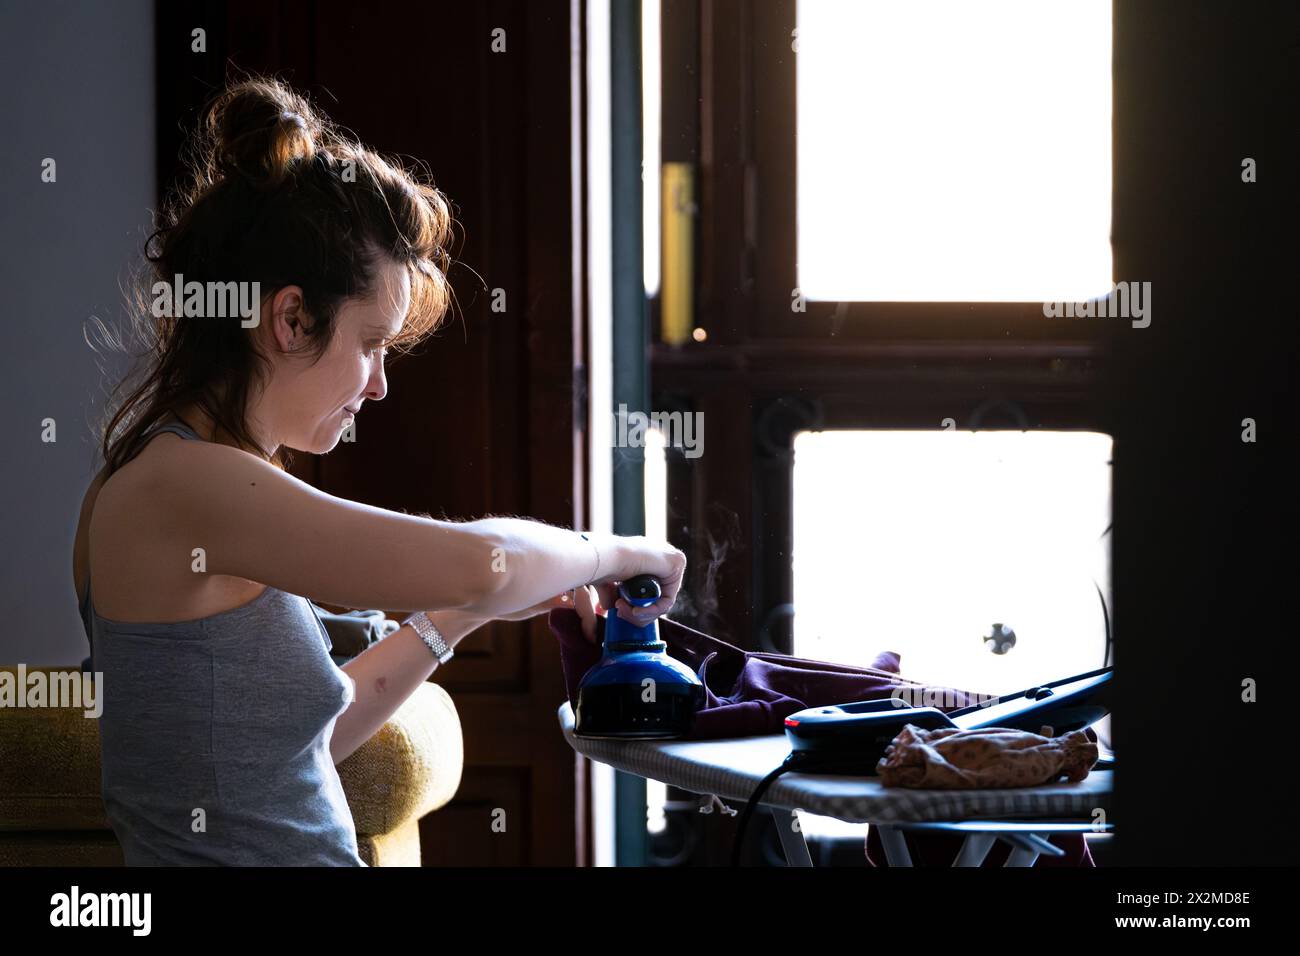 A young woman is focused on ironing clothes on an ironing board in a room with natural light coming from a window Stock Photo